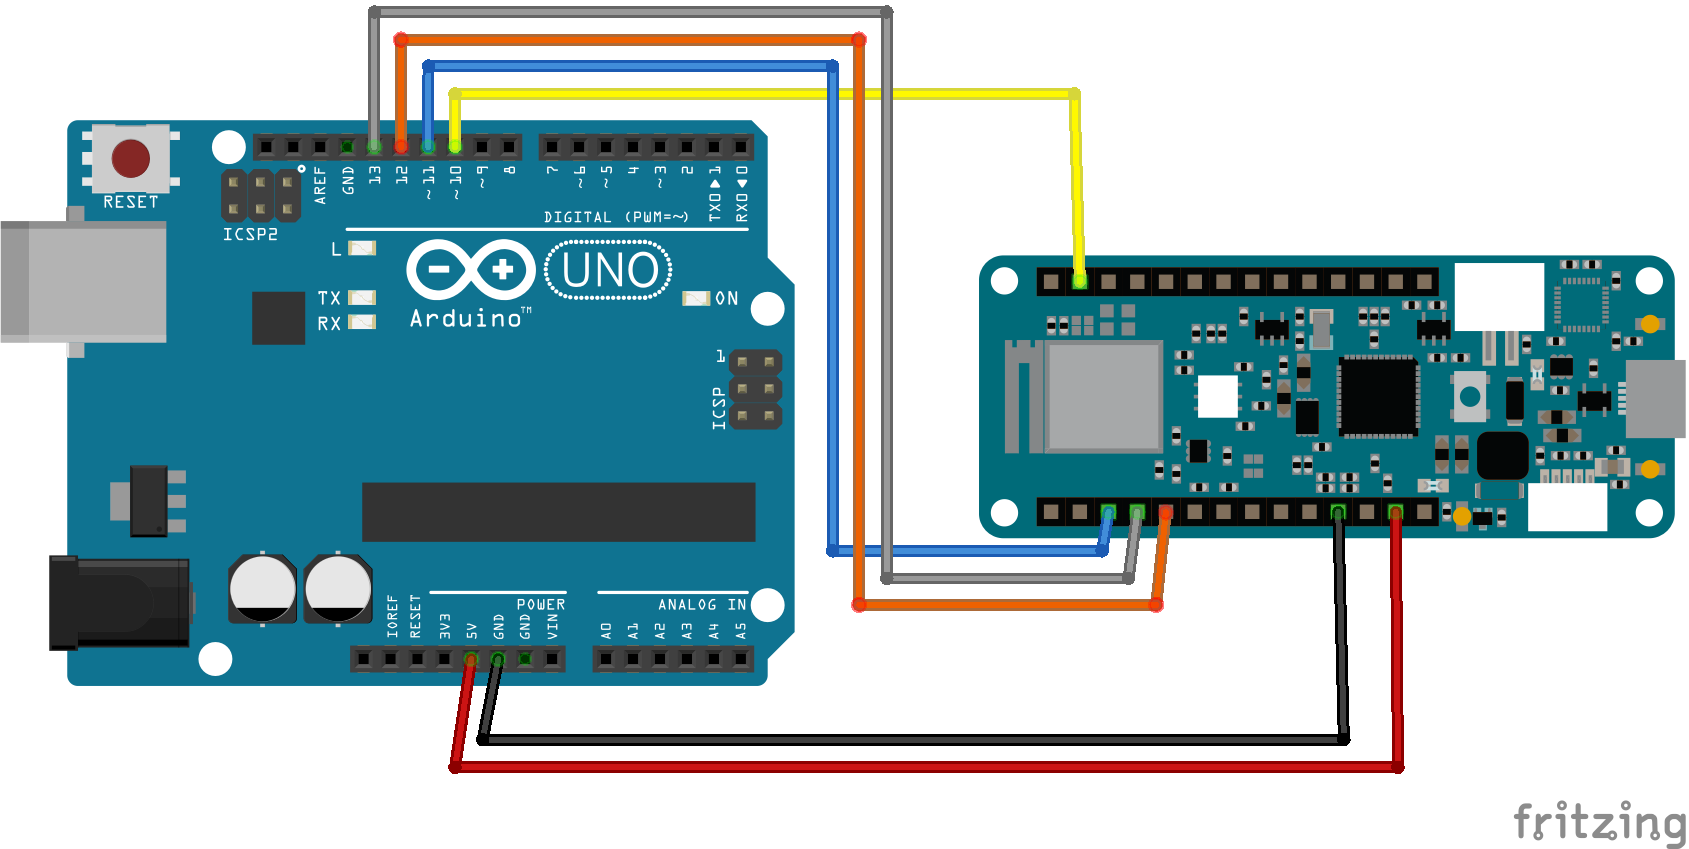 Arduino Uno powers the MKR WiFi 1010. The Uno receives SPI signals from the MKR and displays them on the Monitor.